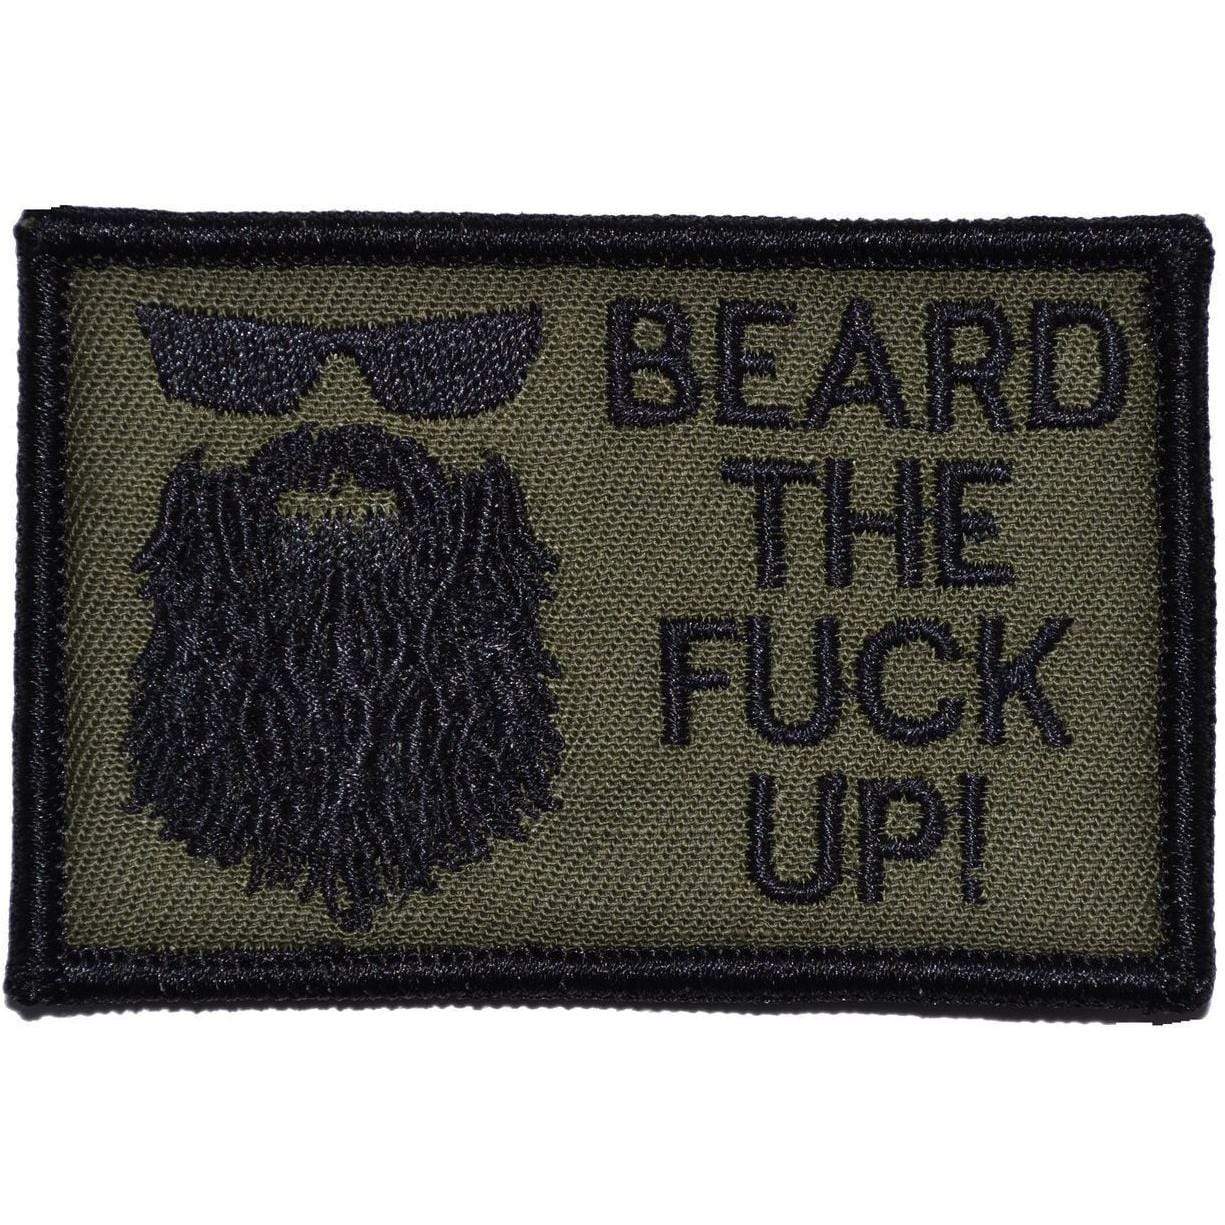 Tactical Gear Junkie Patches Olive Drab Beard the Fuck Up - 2x3 Patch